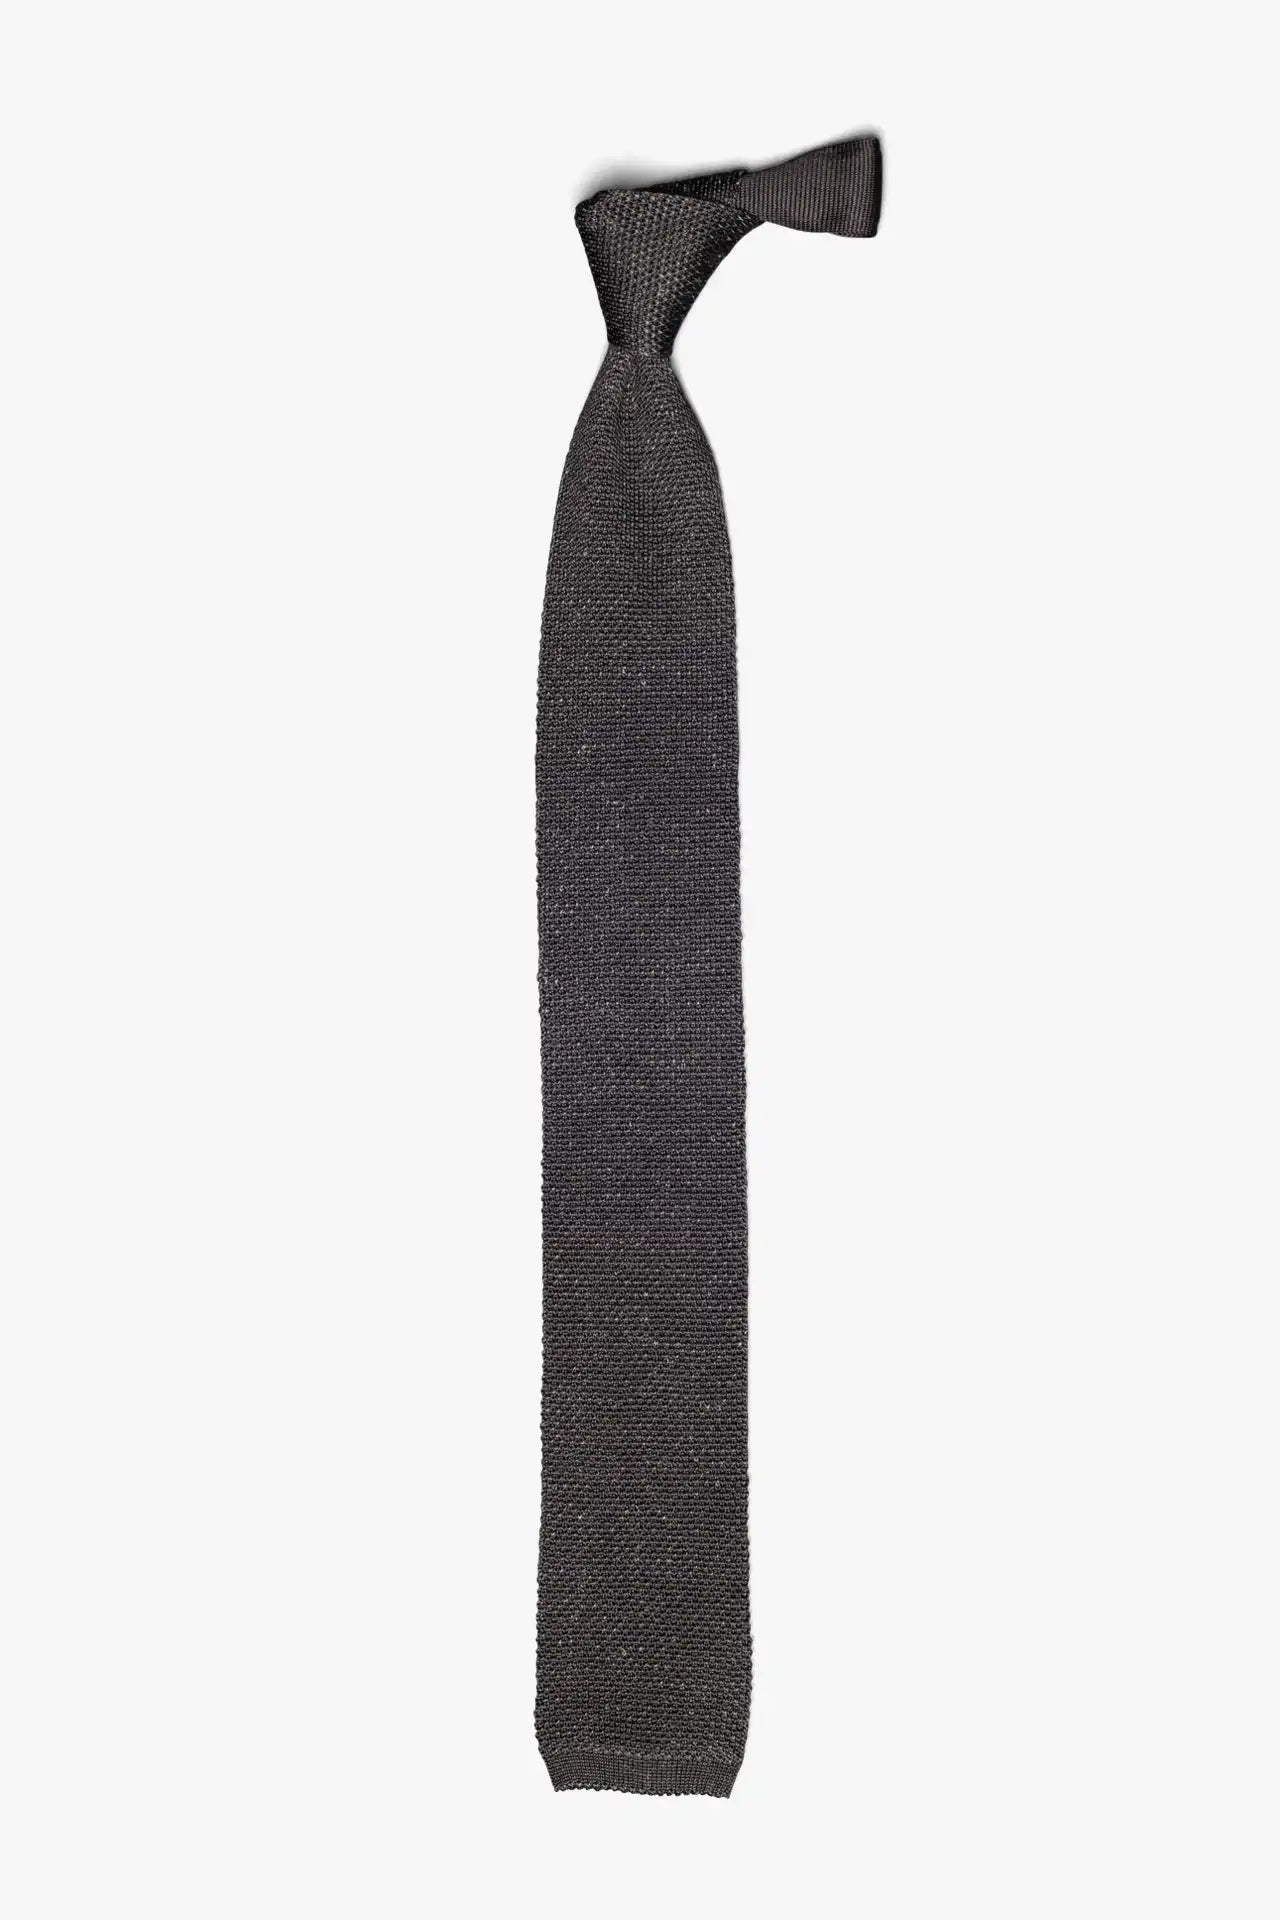 Silk Linen Tie - Gray once day Melange - a